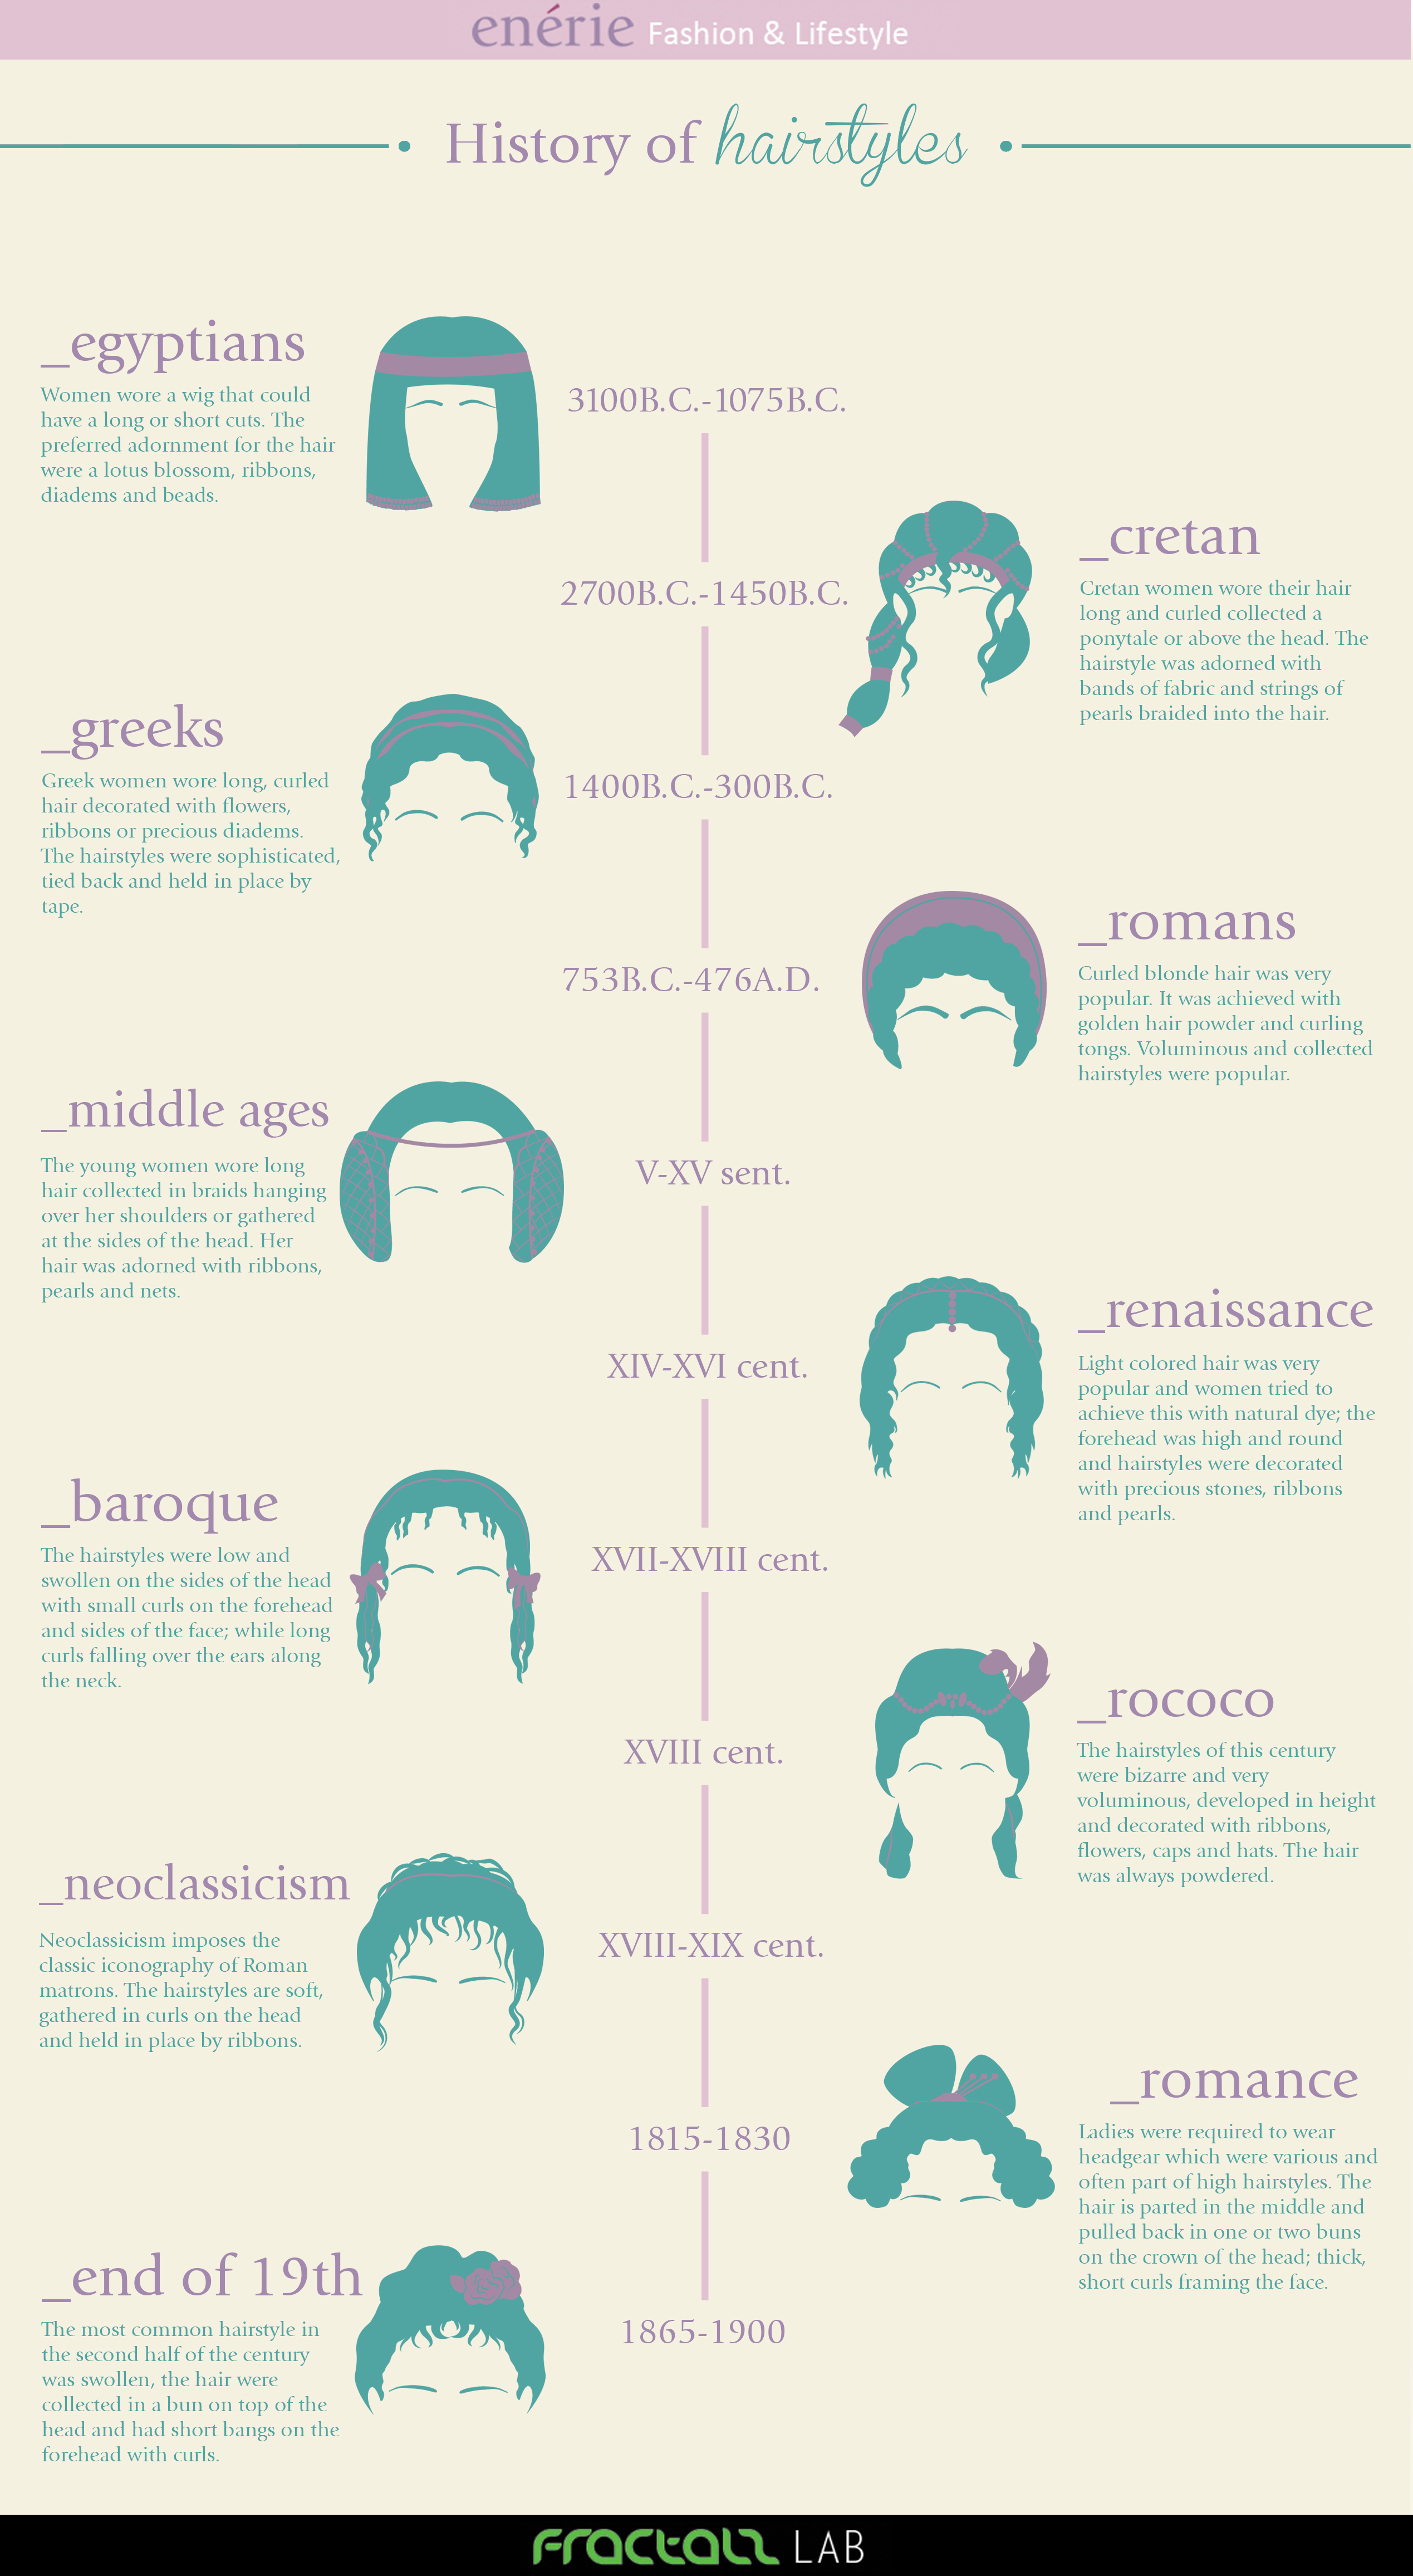 History of Hairstyles (parte 1) | enÃ©rie